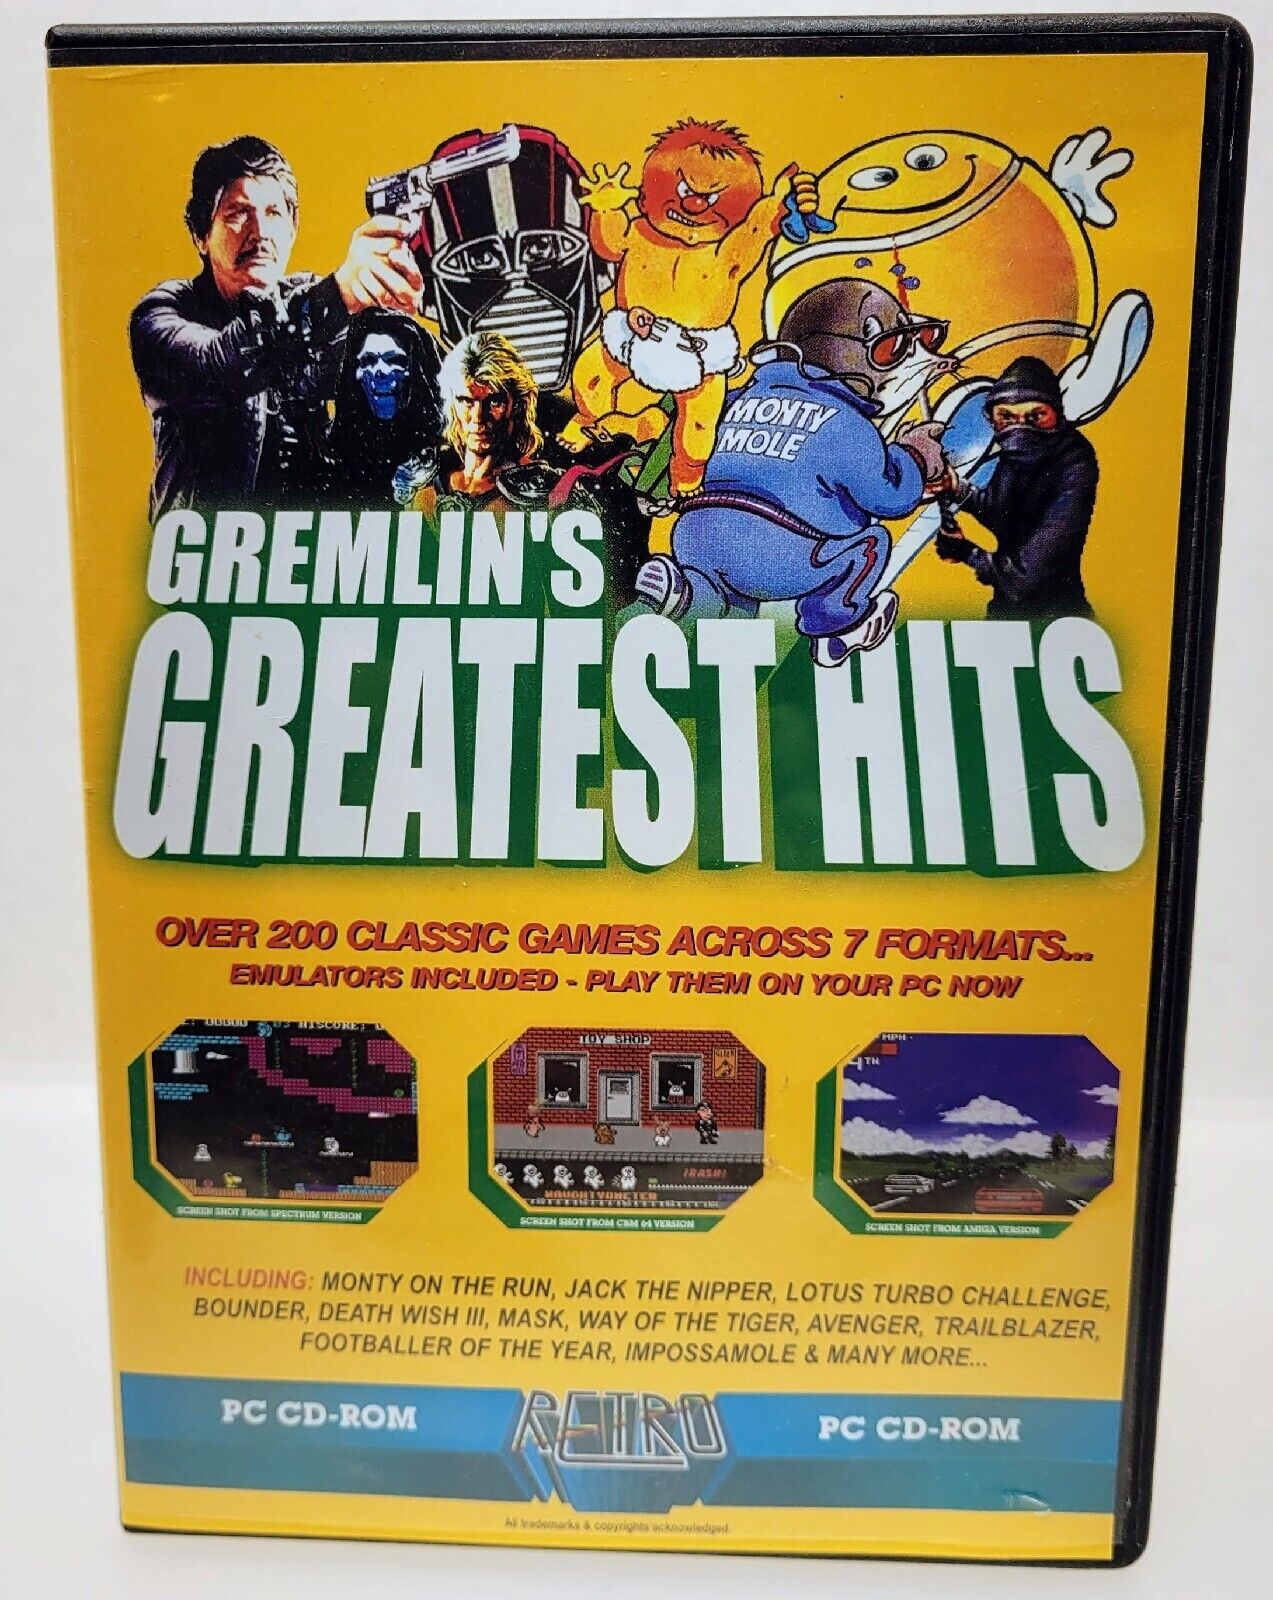 Retro Gamer Issue 3: Gremlin\'s Greatest Hits PC CD-ROM over 200 classic games